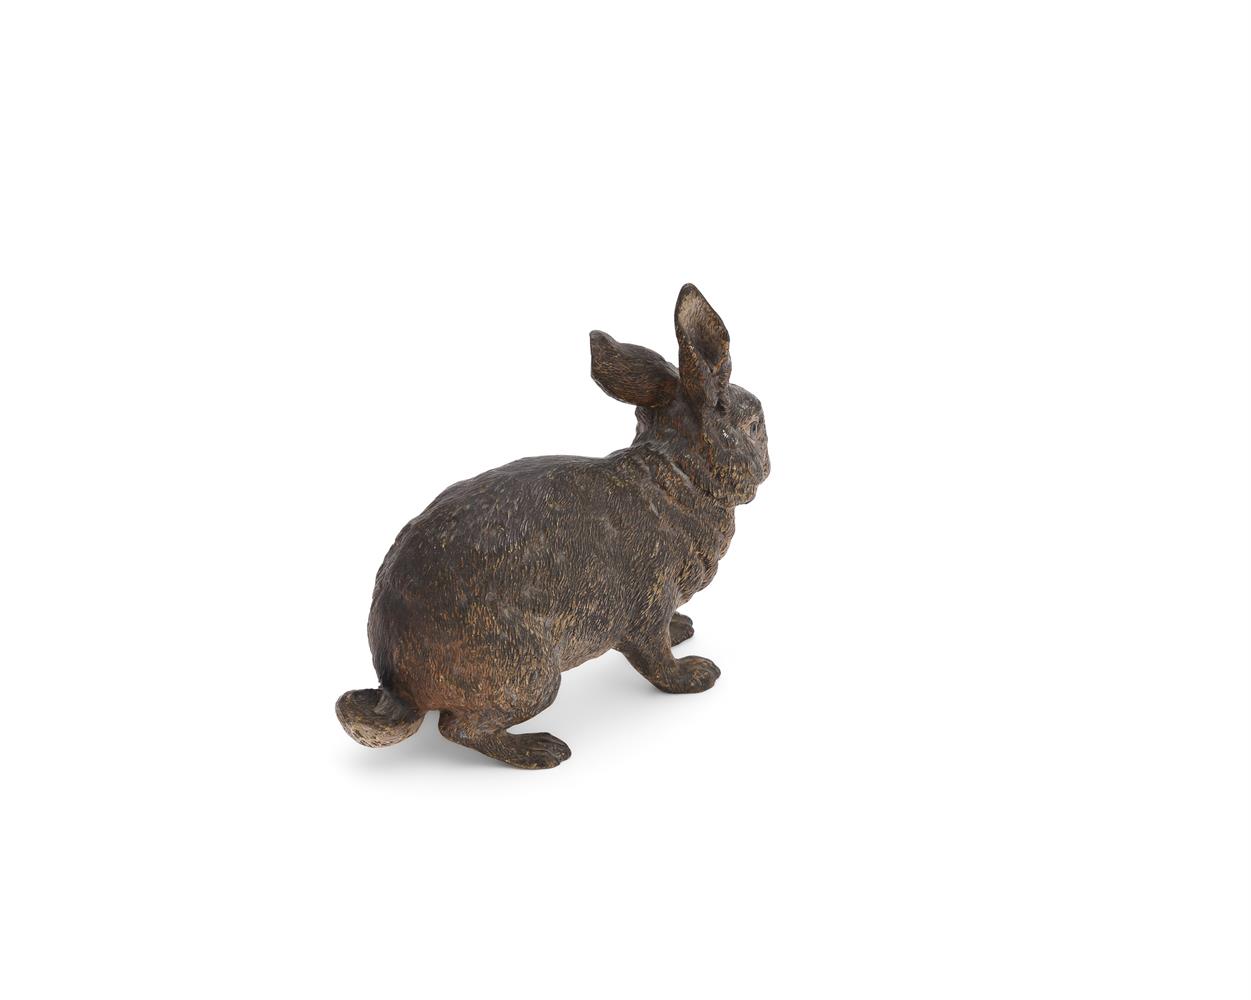 FRANZ XAVIER BERGMAN (1861-1936), A LARGE COLD PAINTED MODEL OF A RABBIT - Image 3 of 4